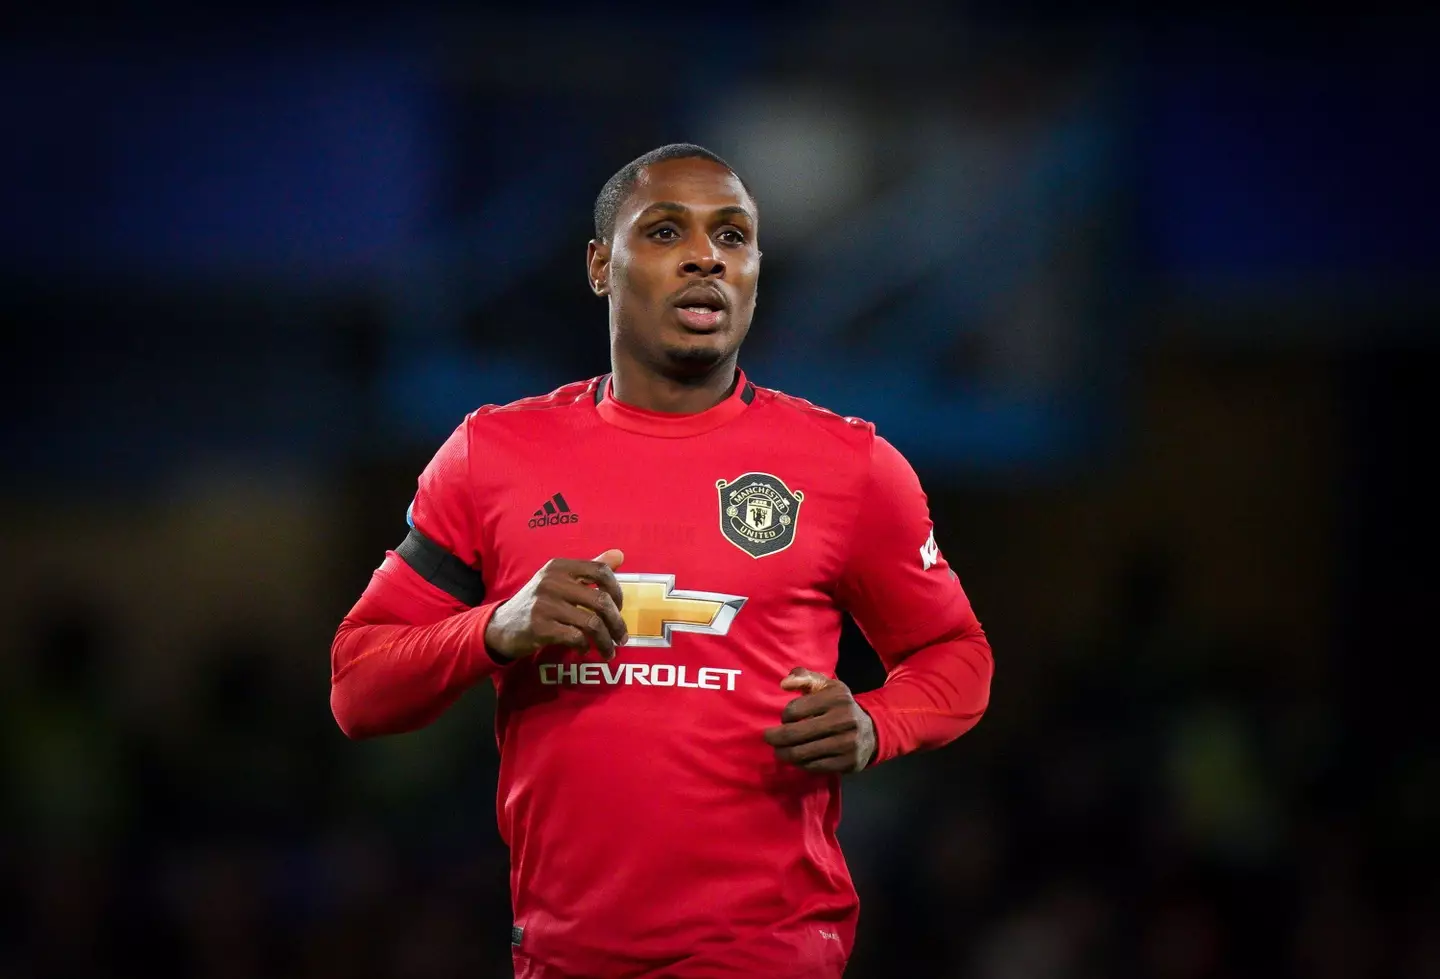 Odion Ighalo makes his debut for Manchester United against Chelsea.